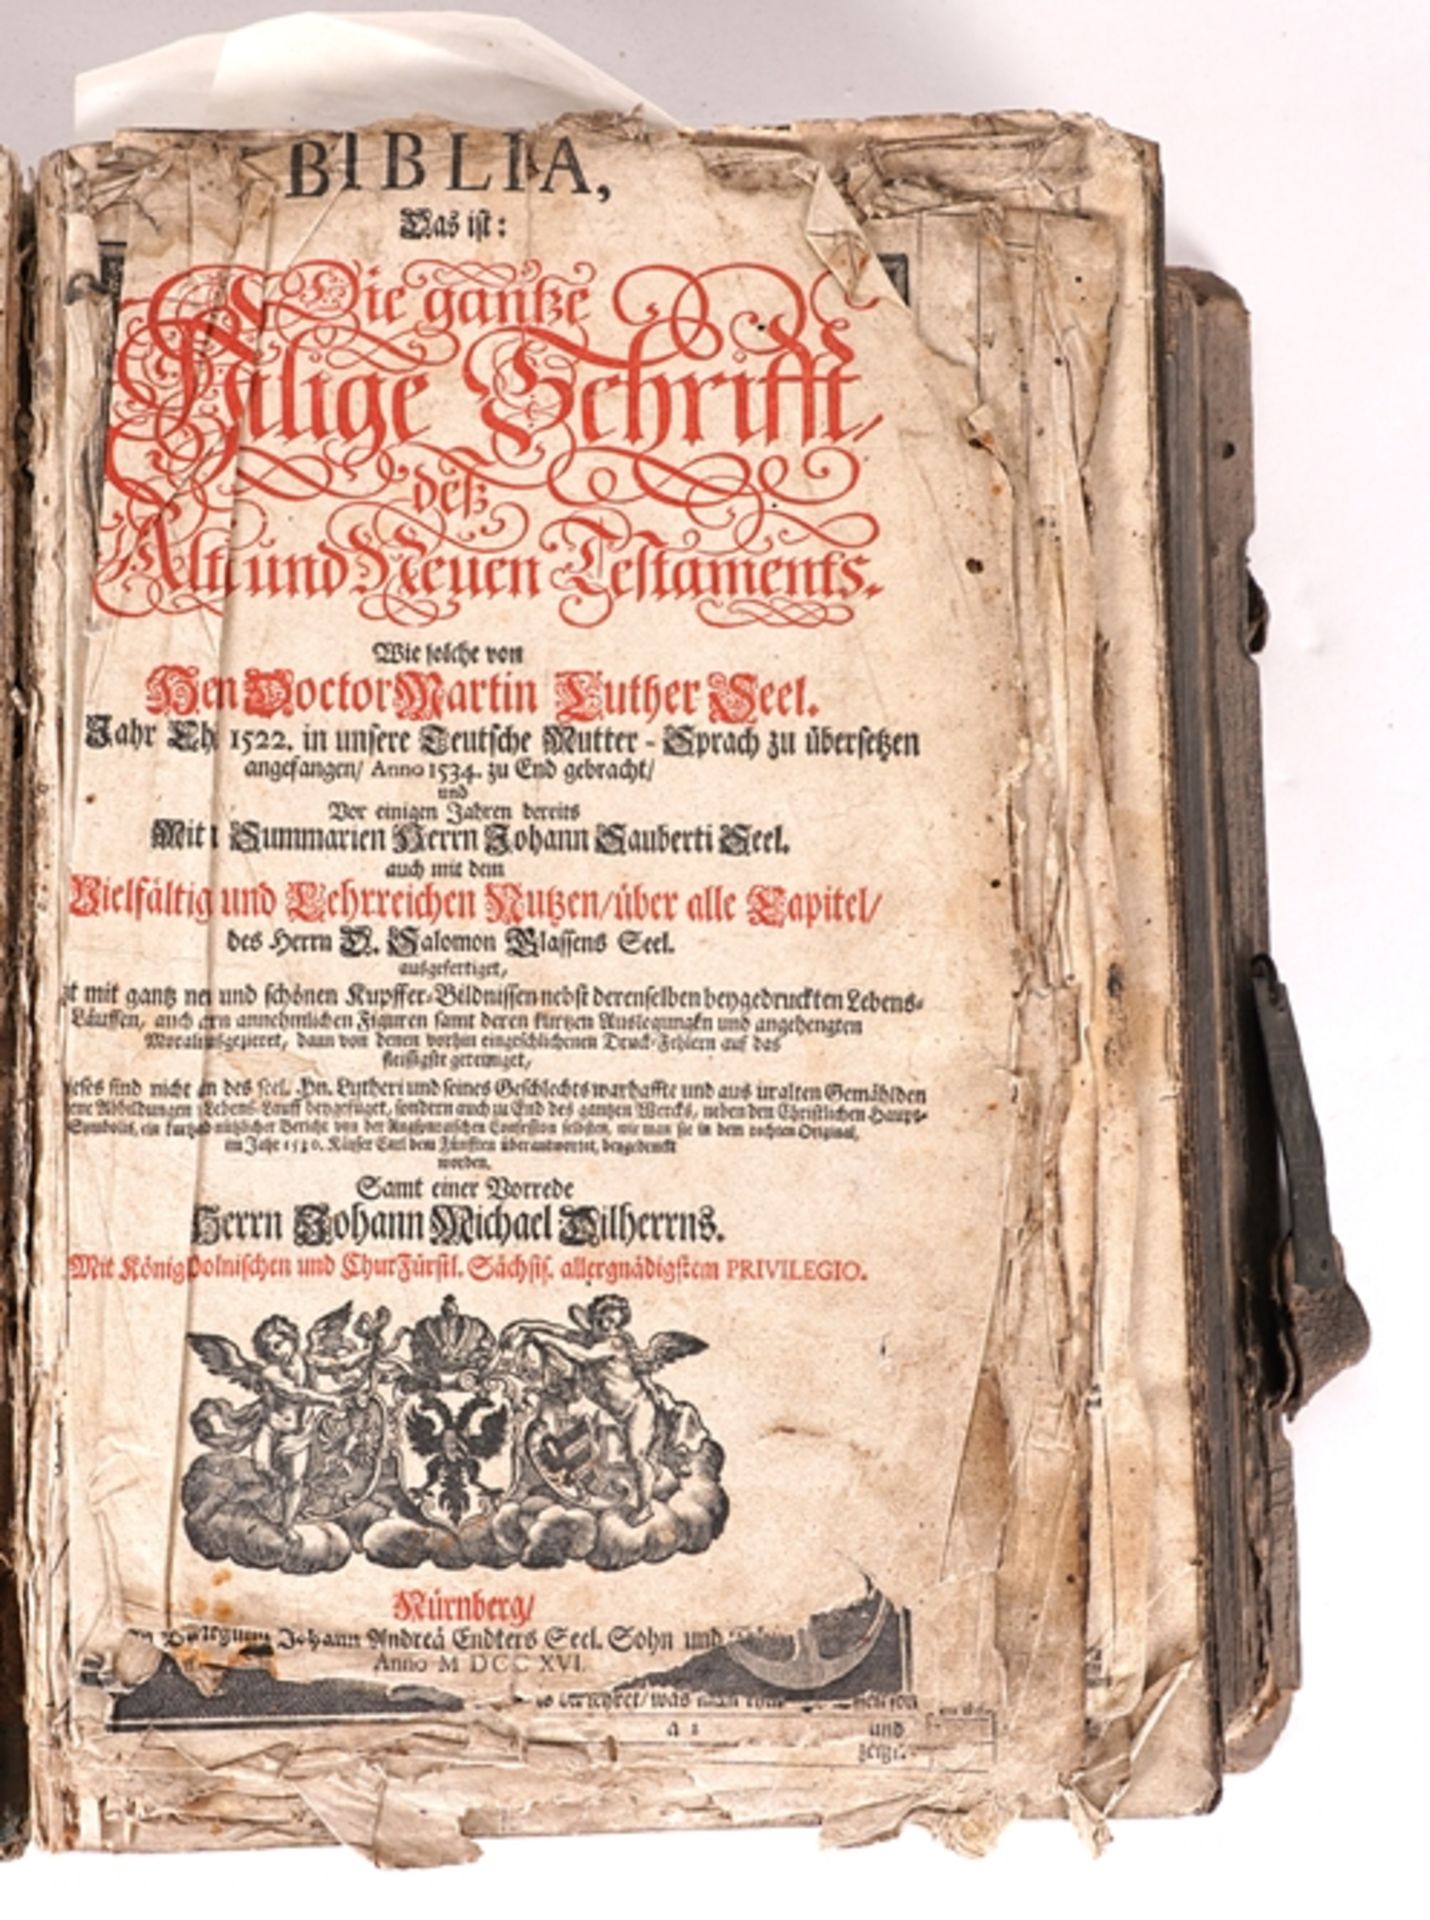 Martin Luther Biblia - Image 3 of 8